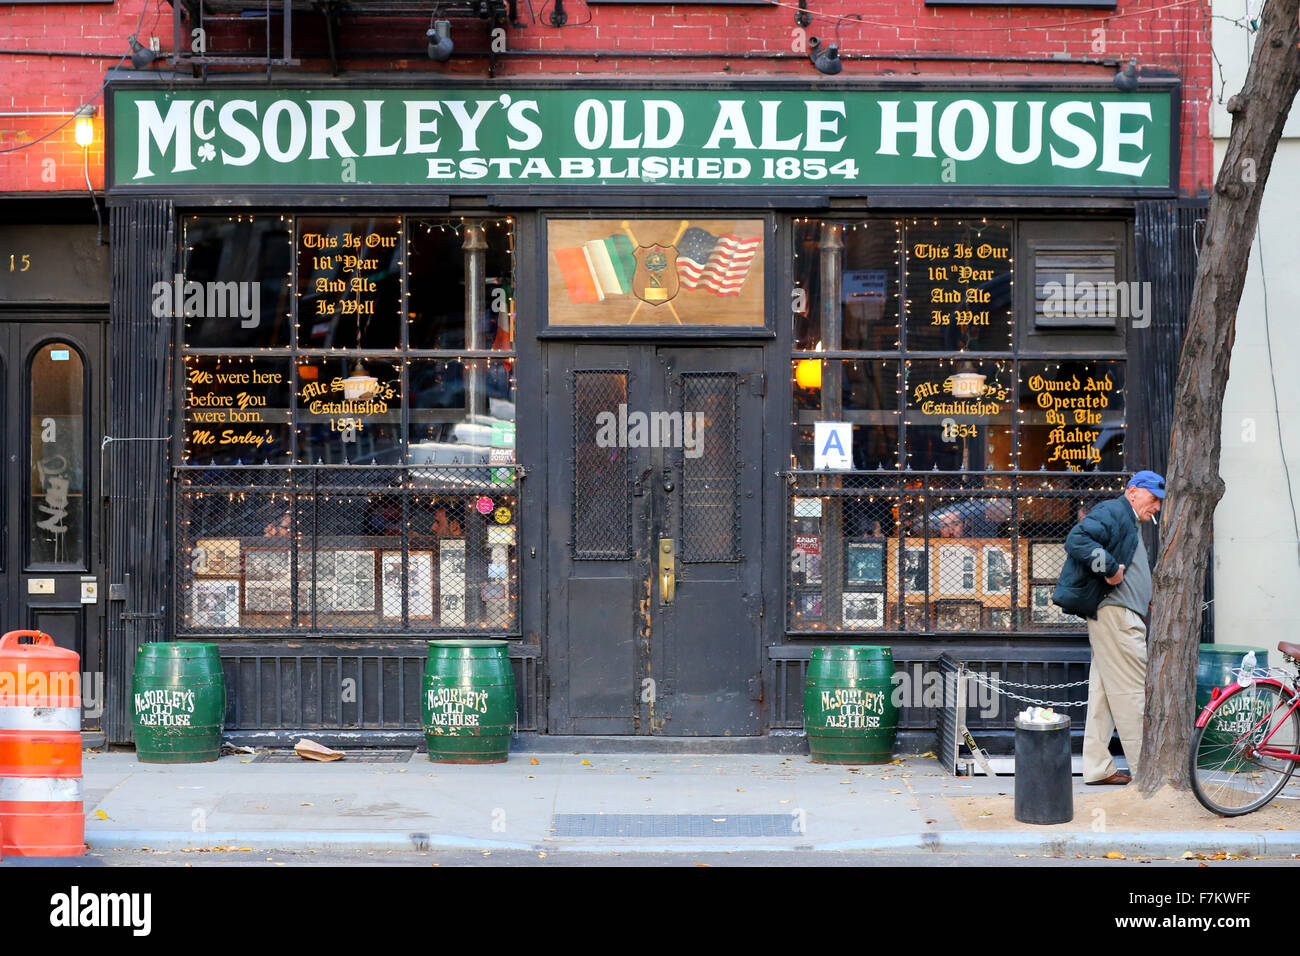 McSorley's Old Ale House, 15 East 7th St, New York, NY. exterior storefront of an Irish bar in the East Village neighborhood of Manhattan. Stock Photo